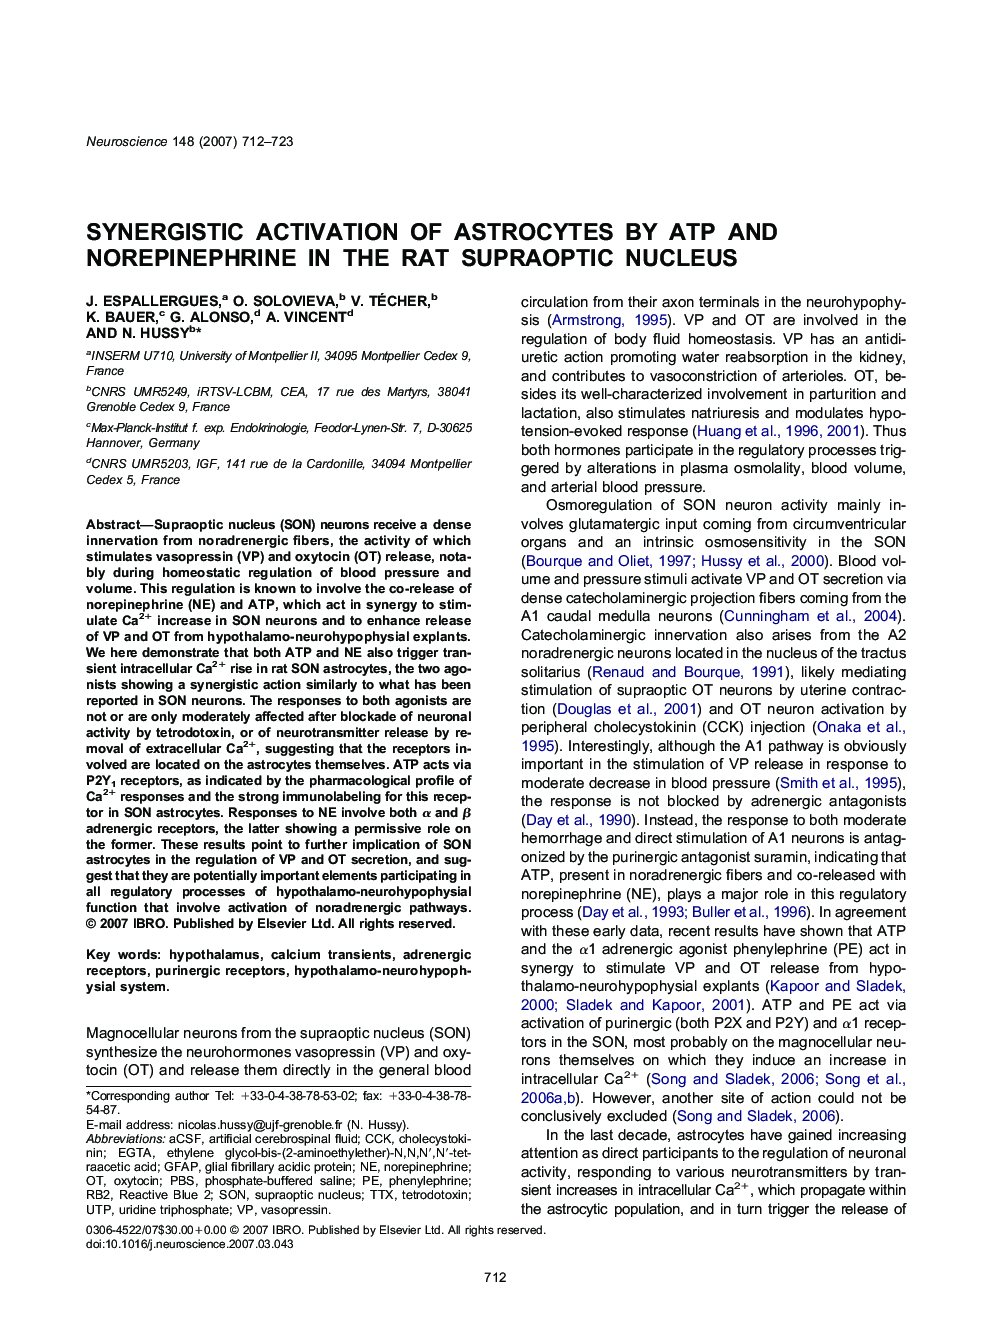 Synergistic activation of astrocytes by ATP and norepinephrine in the rat supraoptic nucleus